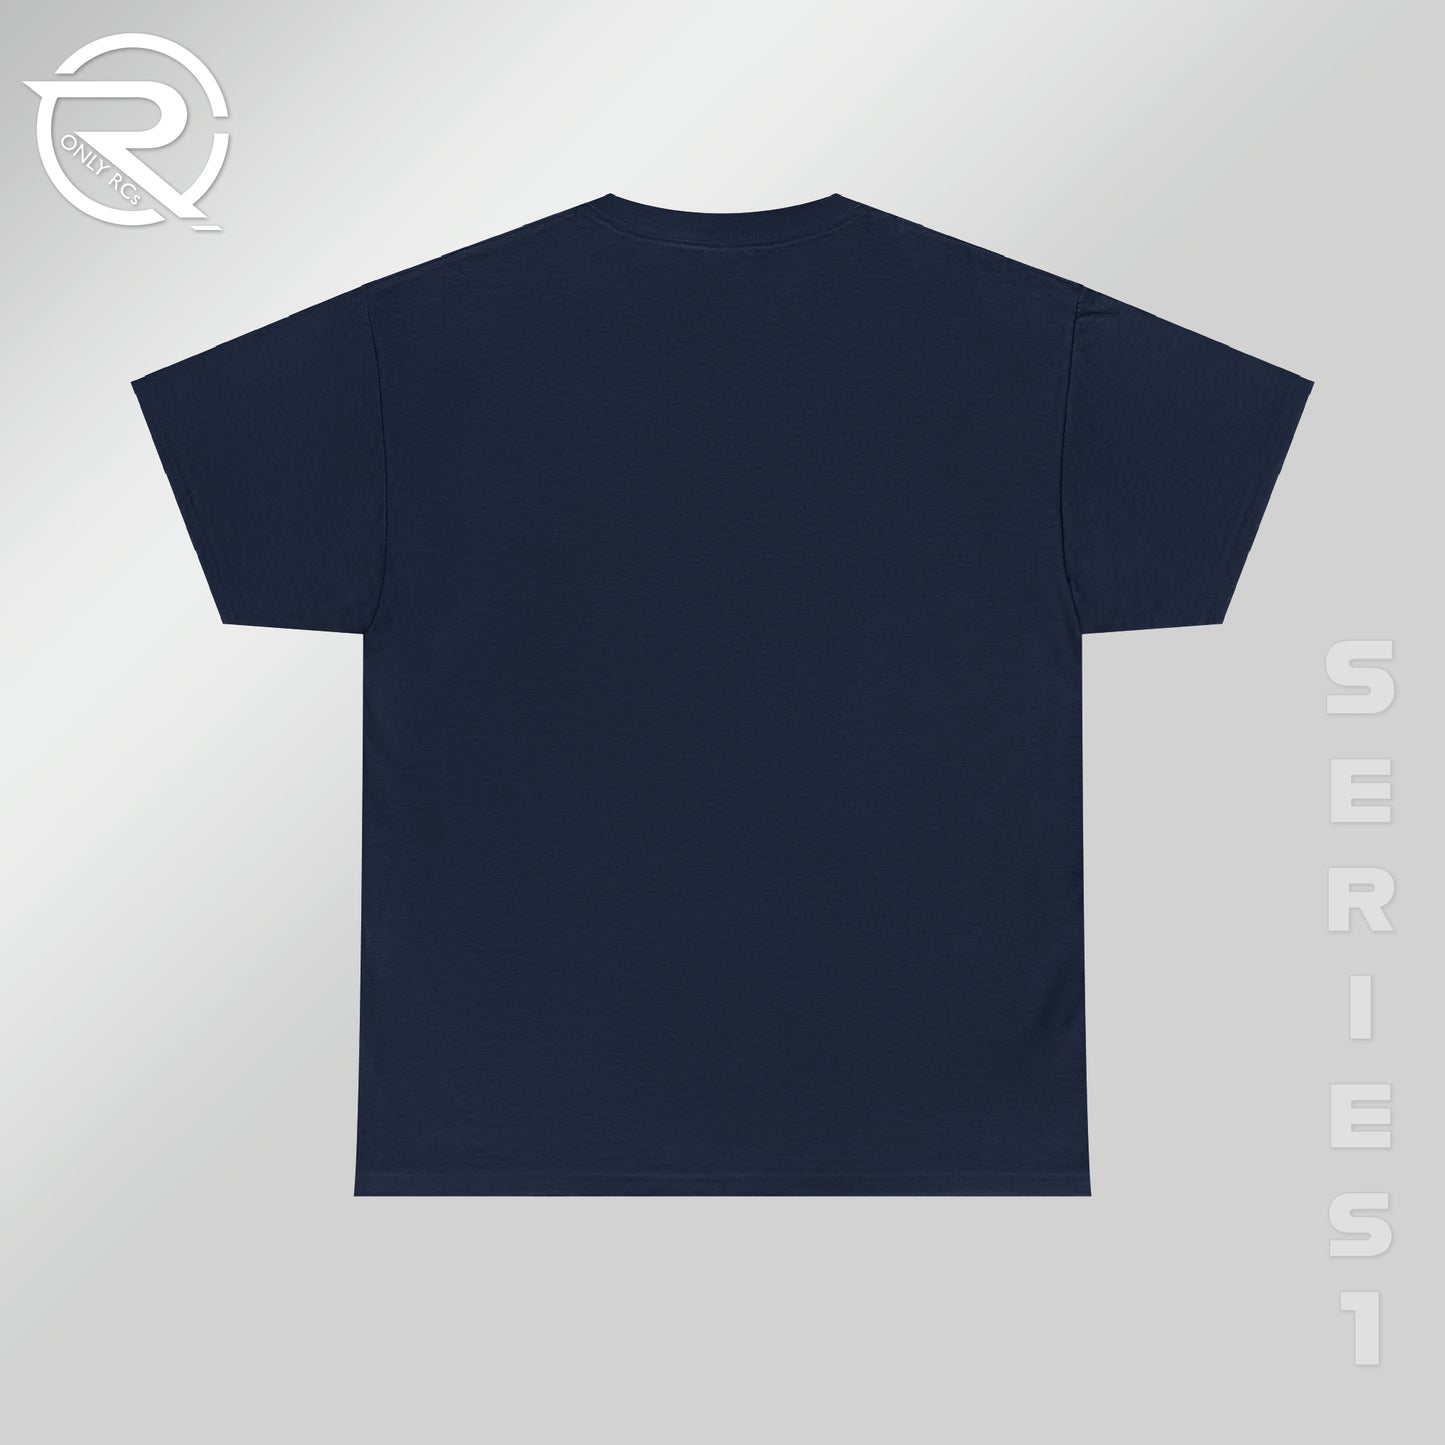 OnlyRCs - 1/16th Scale Racing Addict Heavy Cotton Tee - Series 1